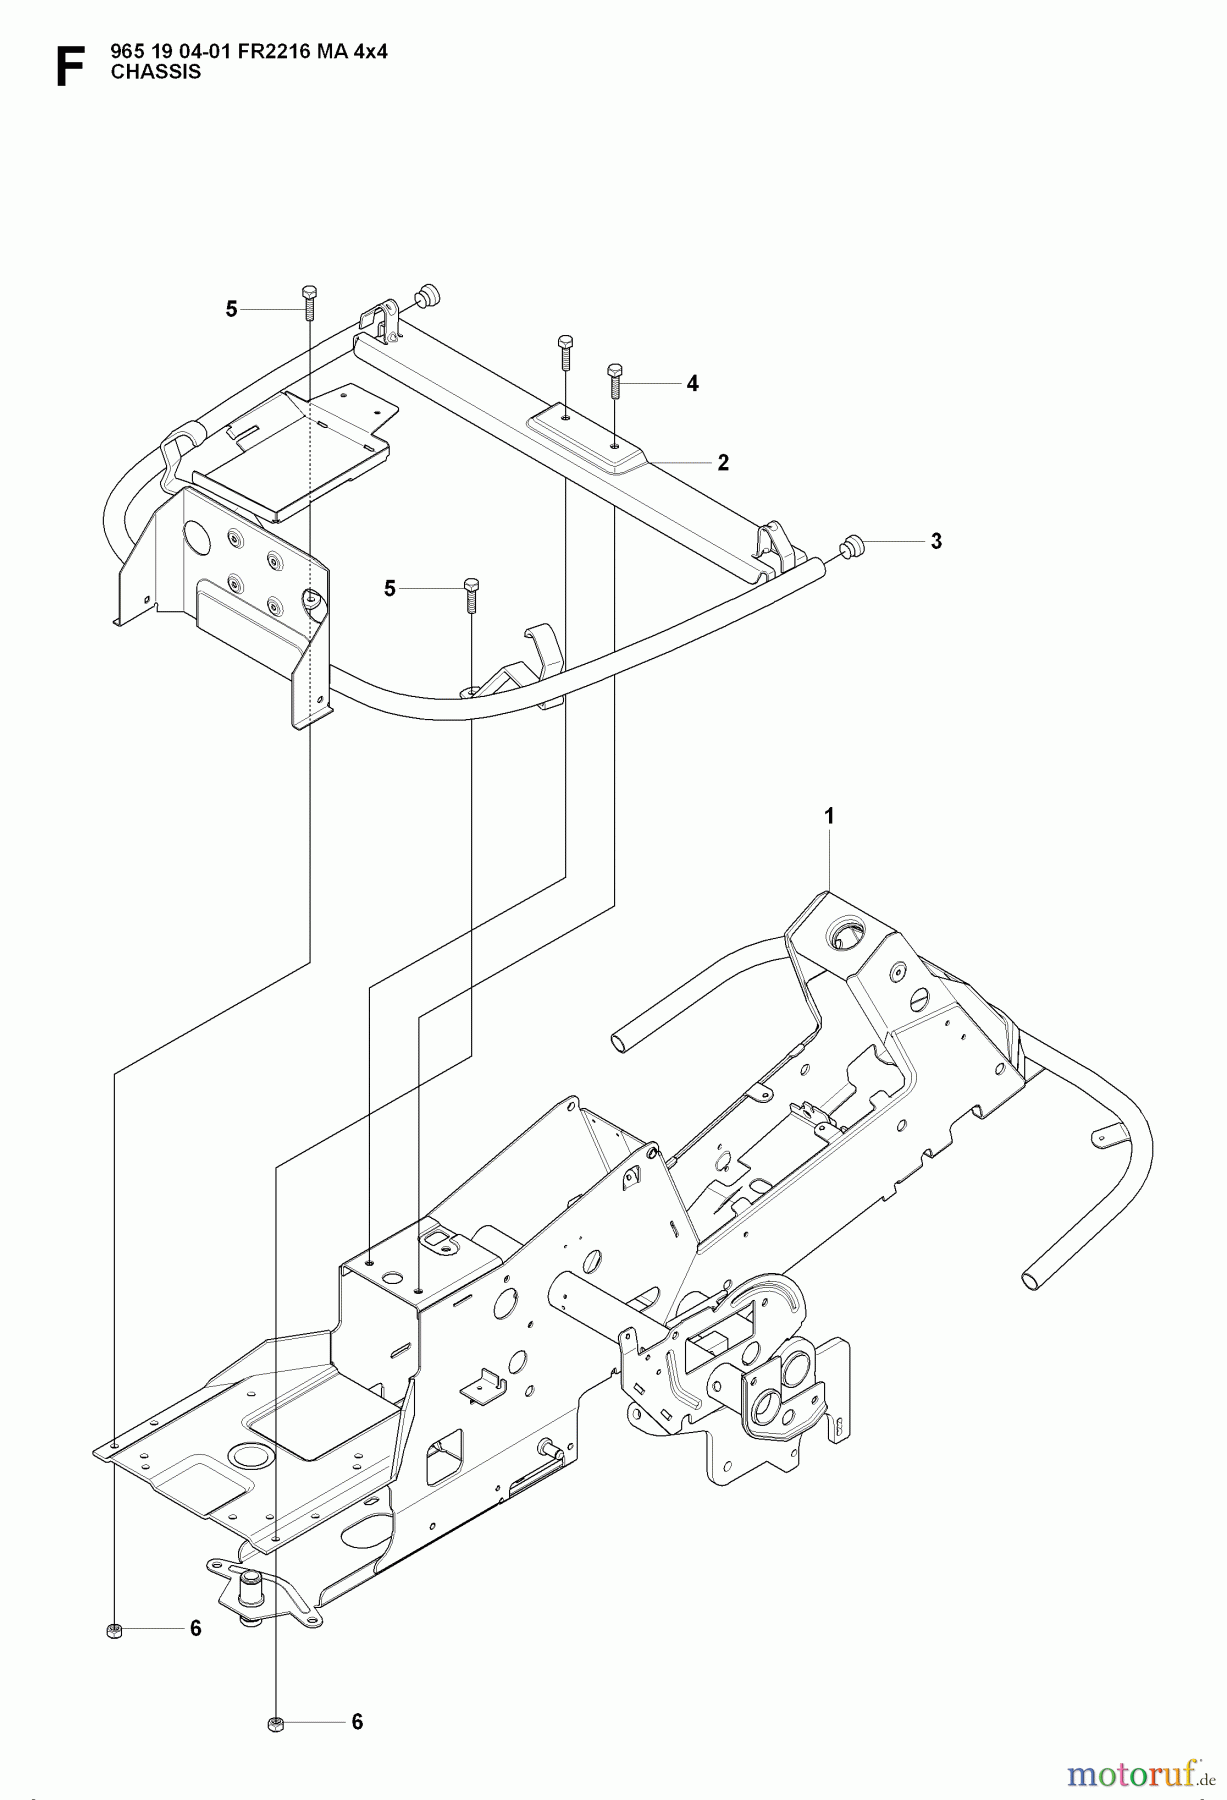  Jonsered Reitermäher FR2216 MA 4x4 (965190401) - Jonsered Rear-Engine Riding Mower (2008-01) CHASSIS ENCLOSURES